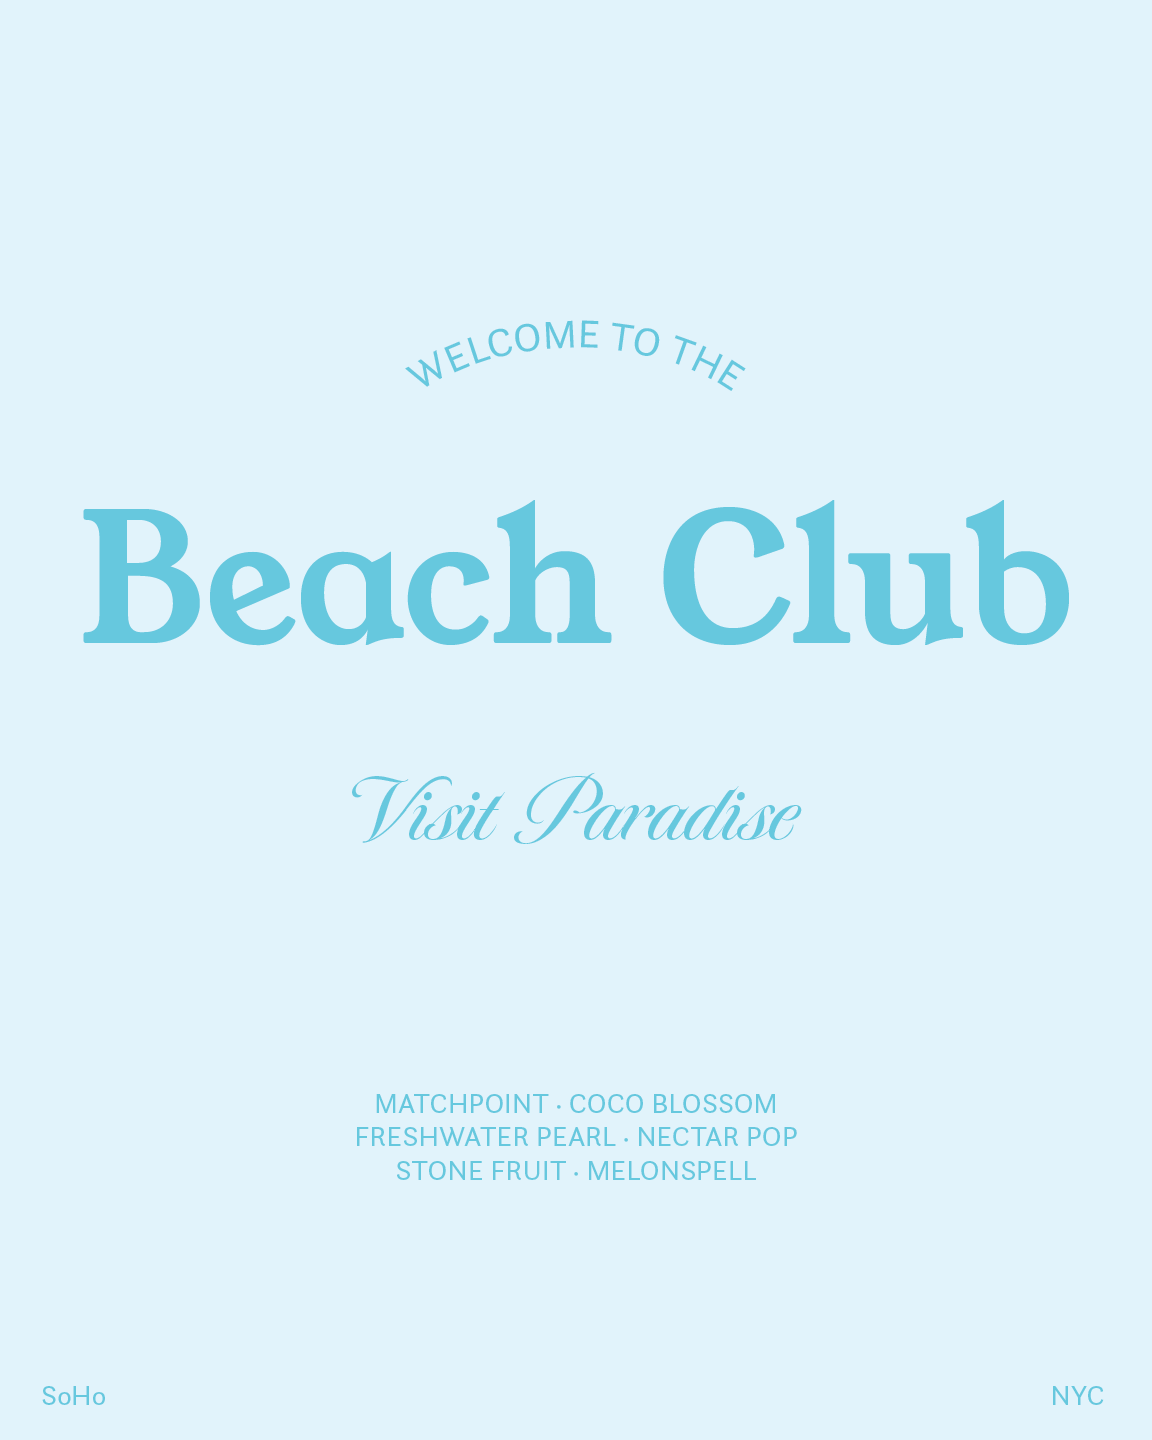 welcome-to-beach-club-1